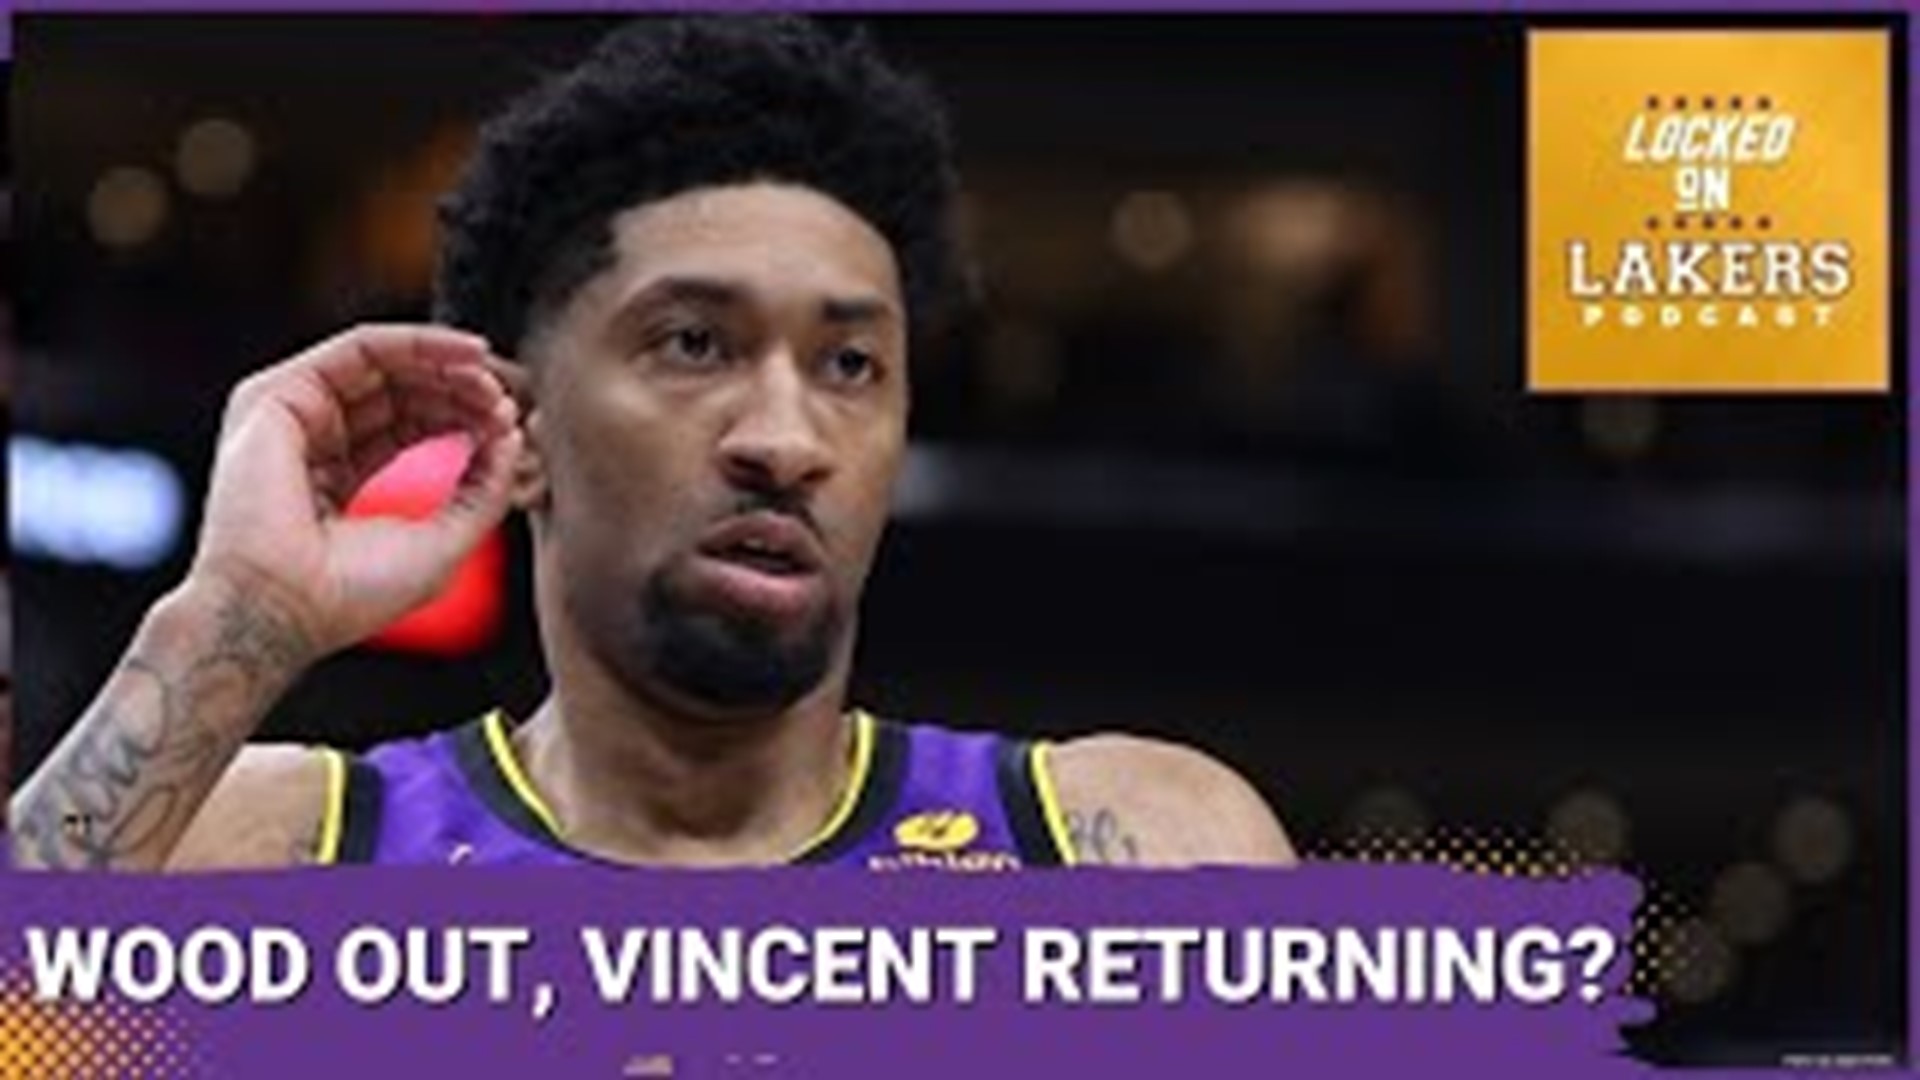 The Lakers Have Reinforcements On the Way... Maybe? Plus, LeBron On His Basketball IQ

Many things related to the ability of the Lakers to make a run this year.